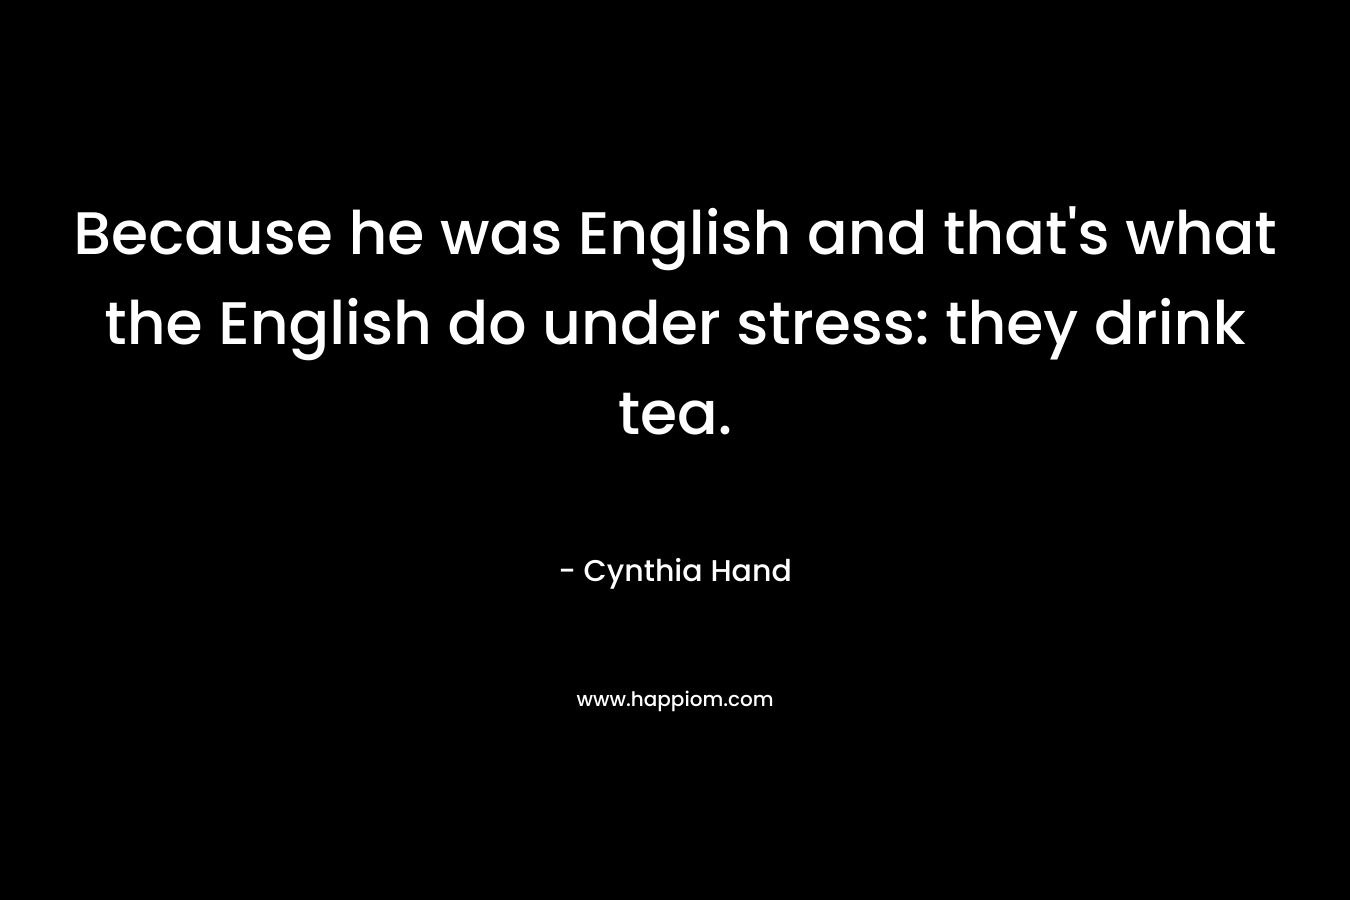 Because he was English and that's what the English do under stress: they drink tea.